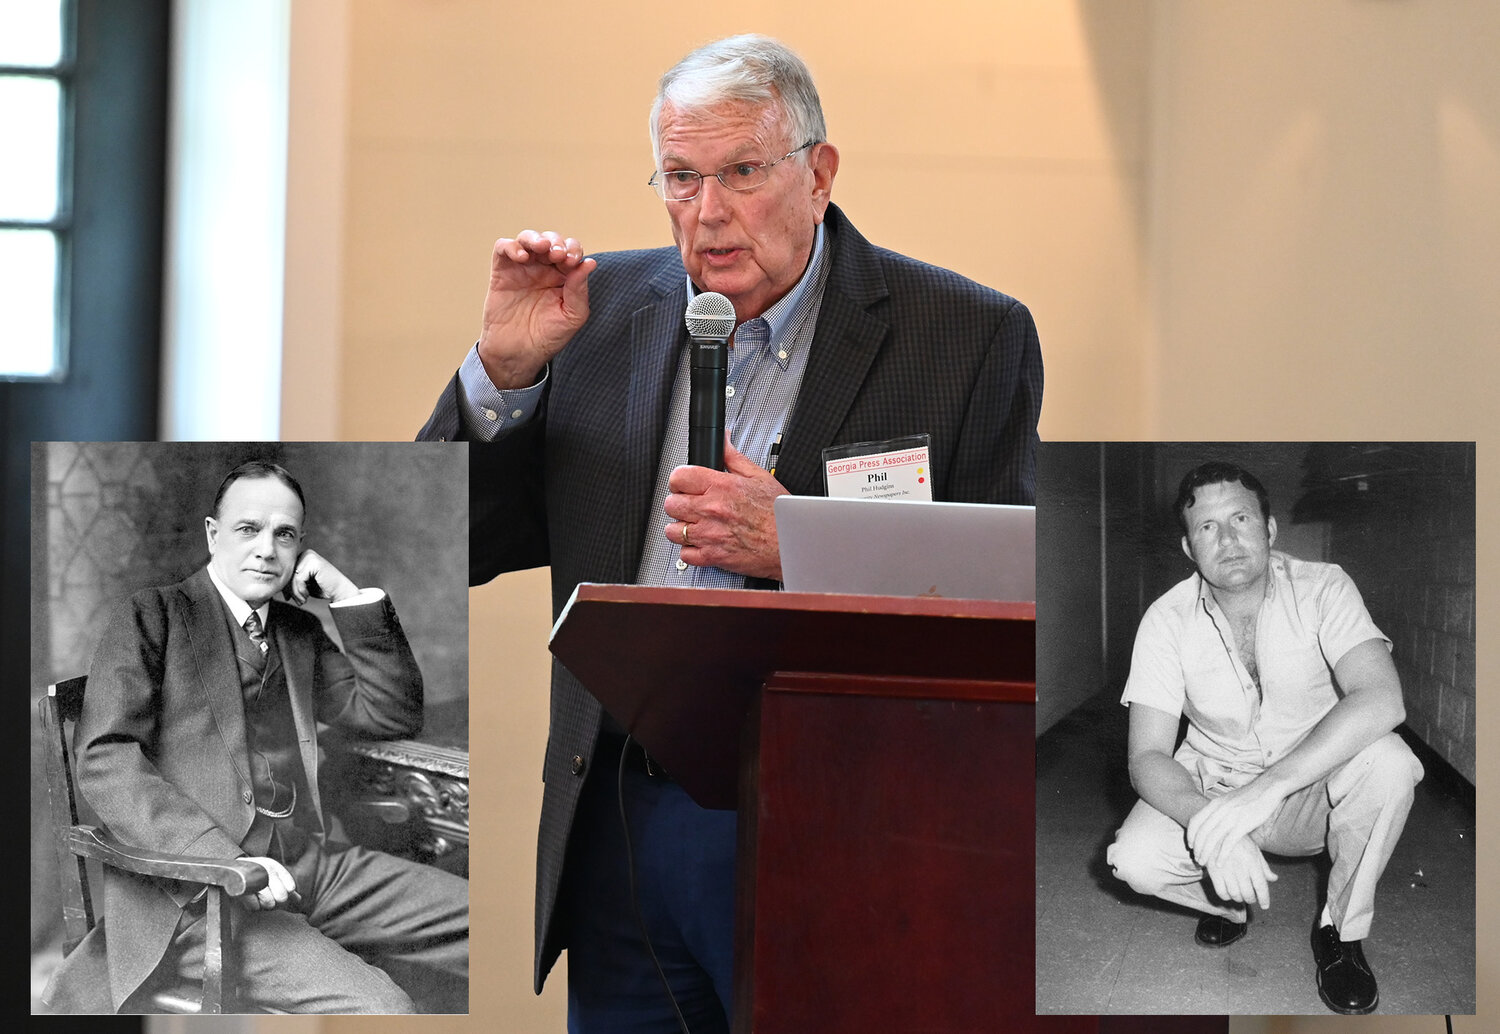 Longtime Georgia newspaper editor Phil Hudgins speaks to members of the Georgia Press Association about the late Billy Sunday Birt at Jekyll Island on June 8, 2023. The inset photos are, left, famed evangelist Billy Sunday and convicted murderer Billy Sunday Birt. (Index/Henry Durand)